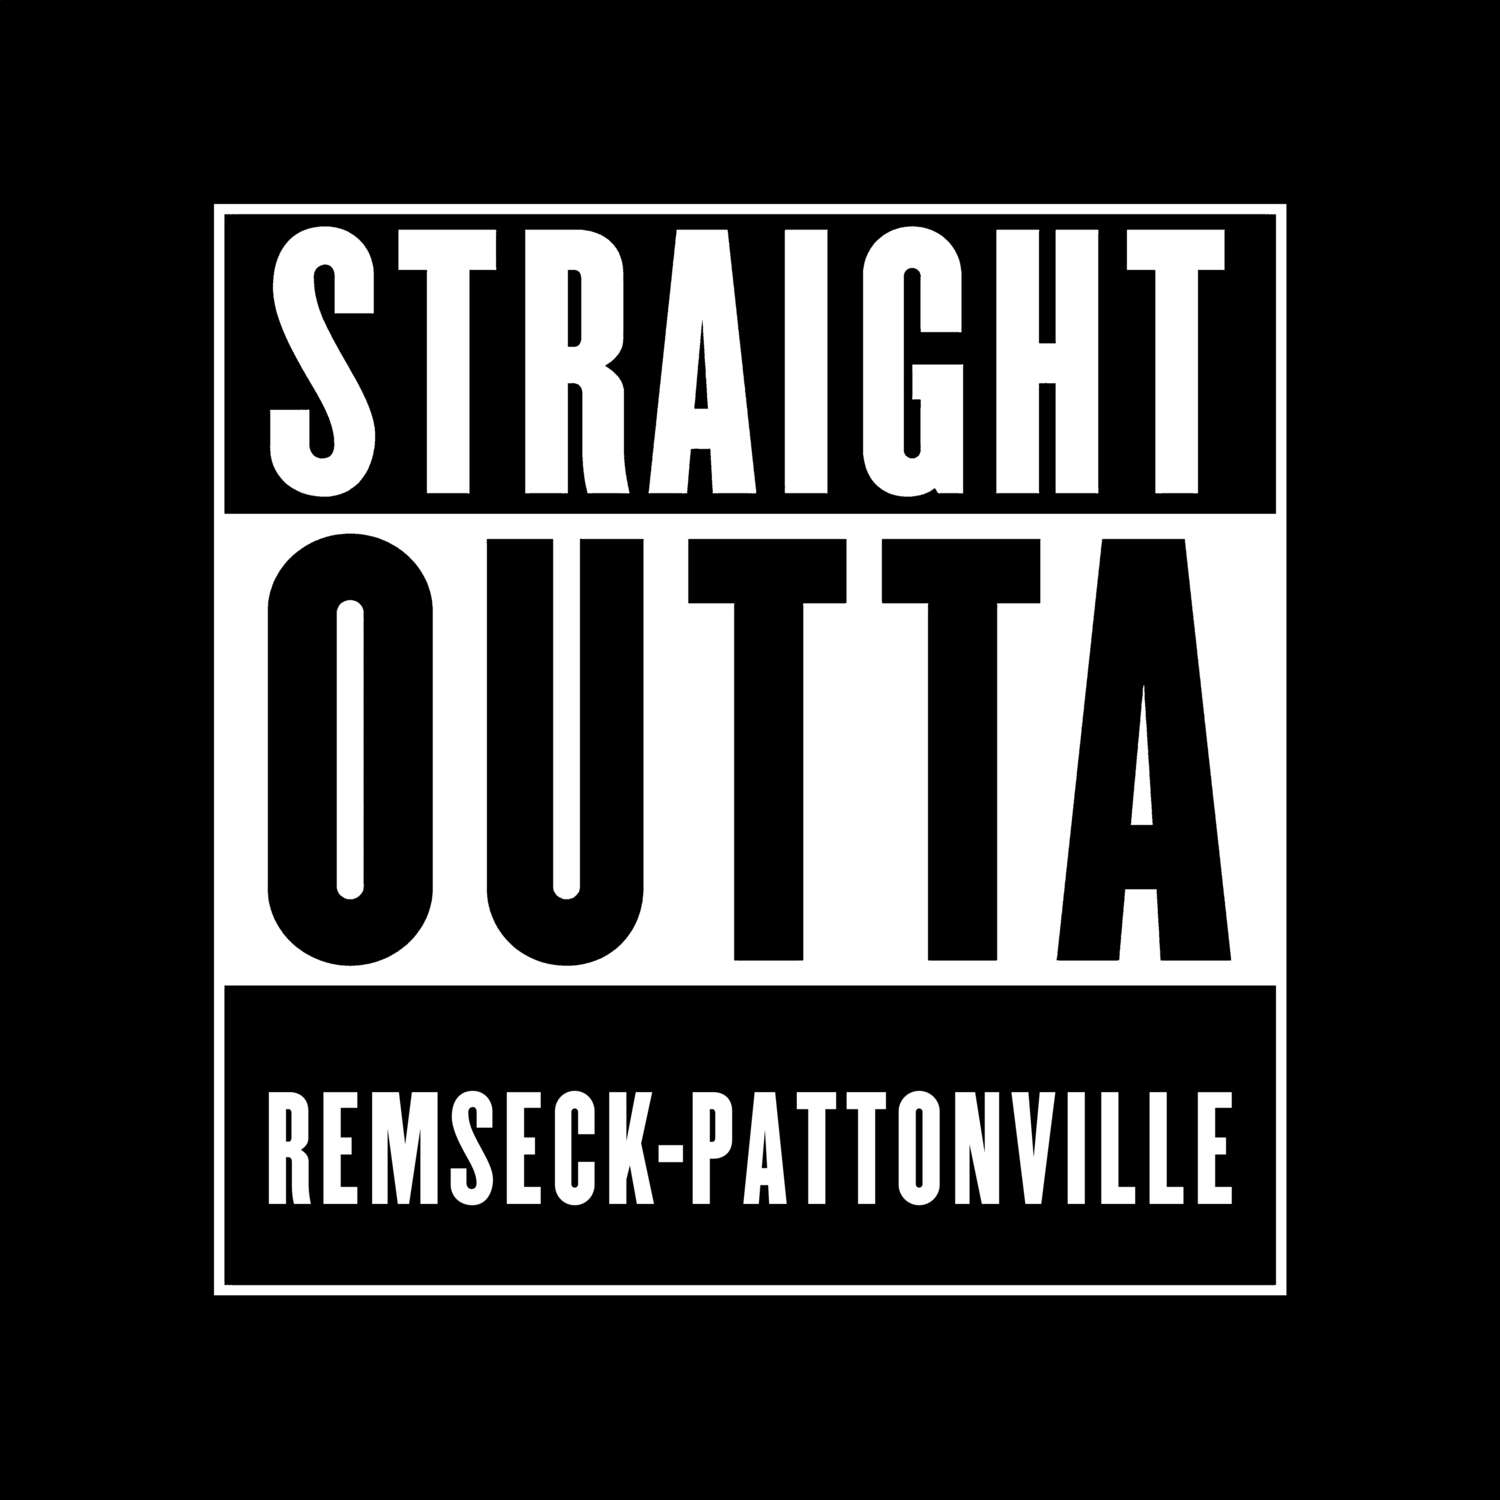 Remseck-Pattonville T-Shirt »Straight Outta«